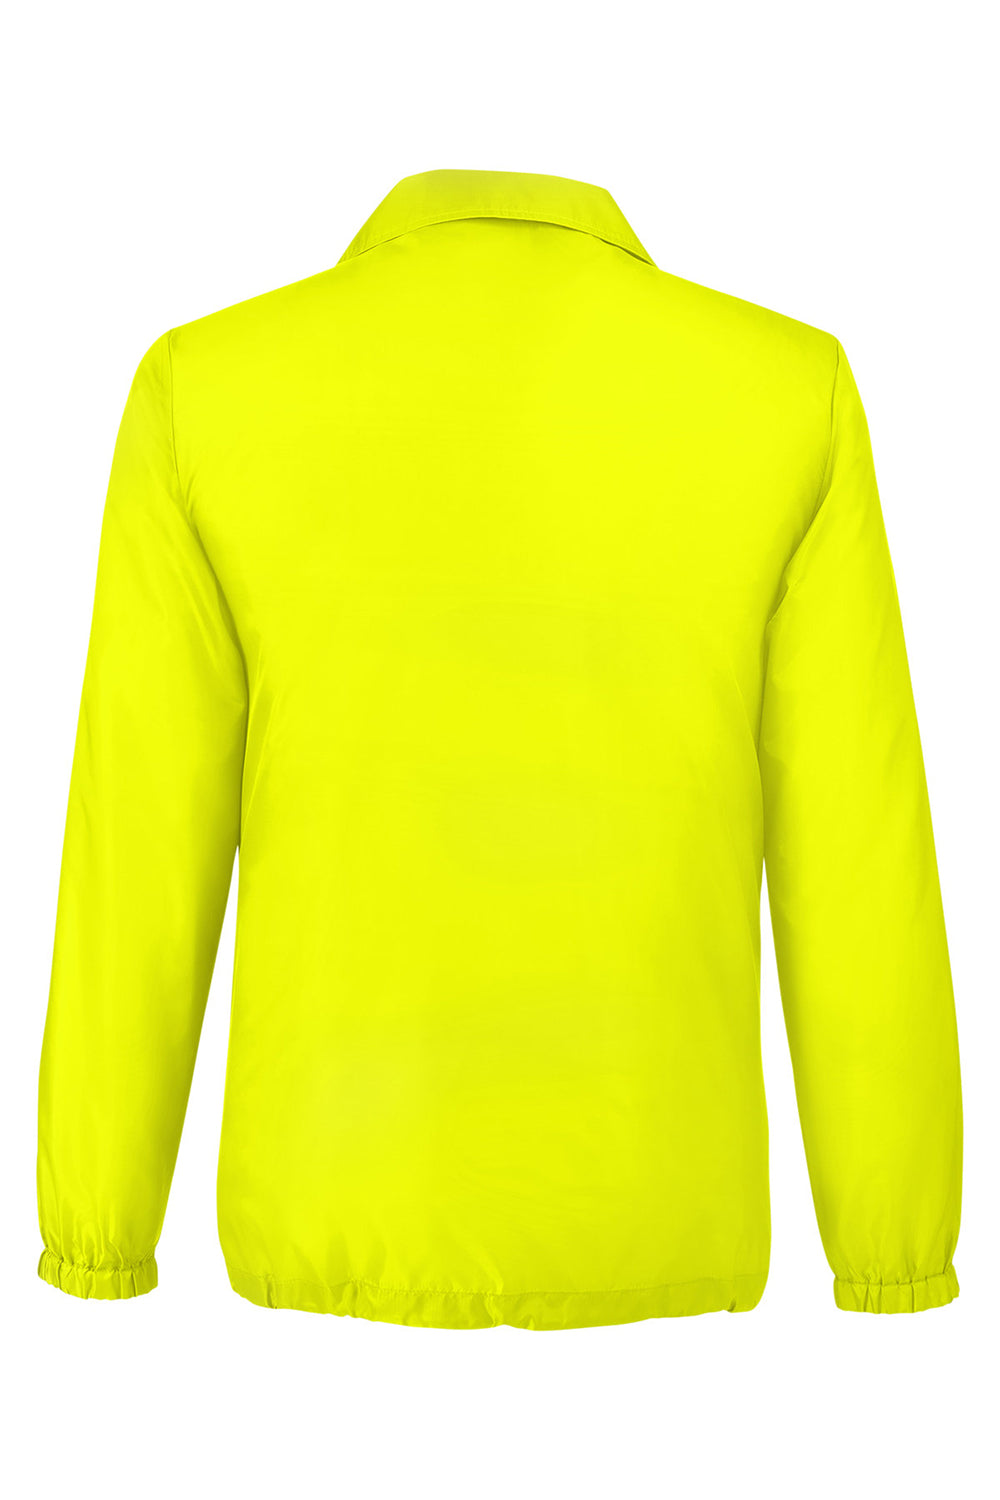 Team 365 TT75 Mens Zone Protect Snap Down Coaches Jacket Safety Yellow Flat Back